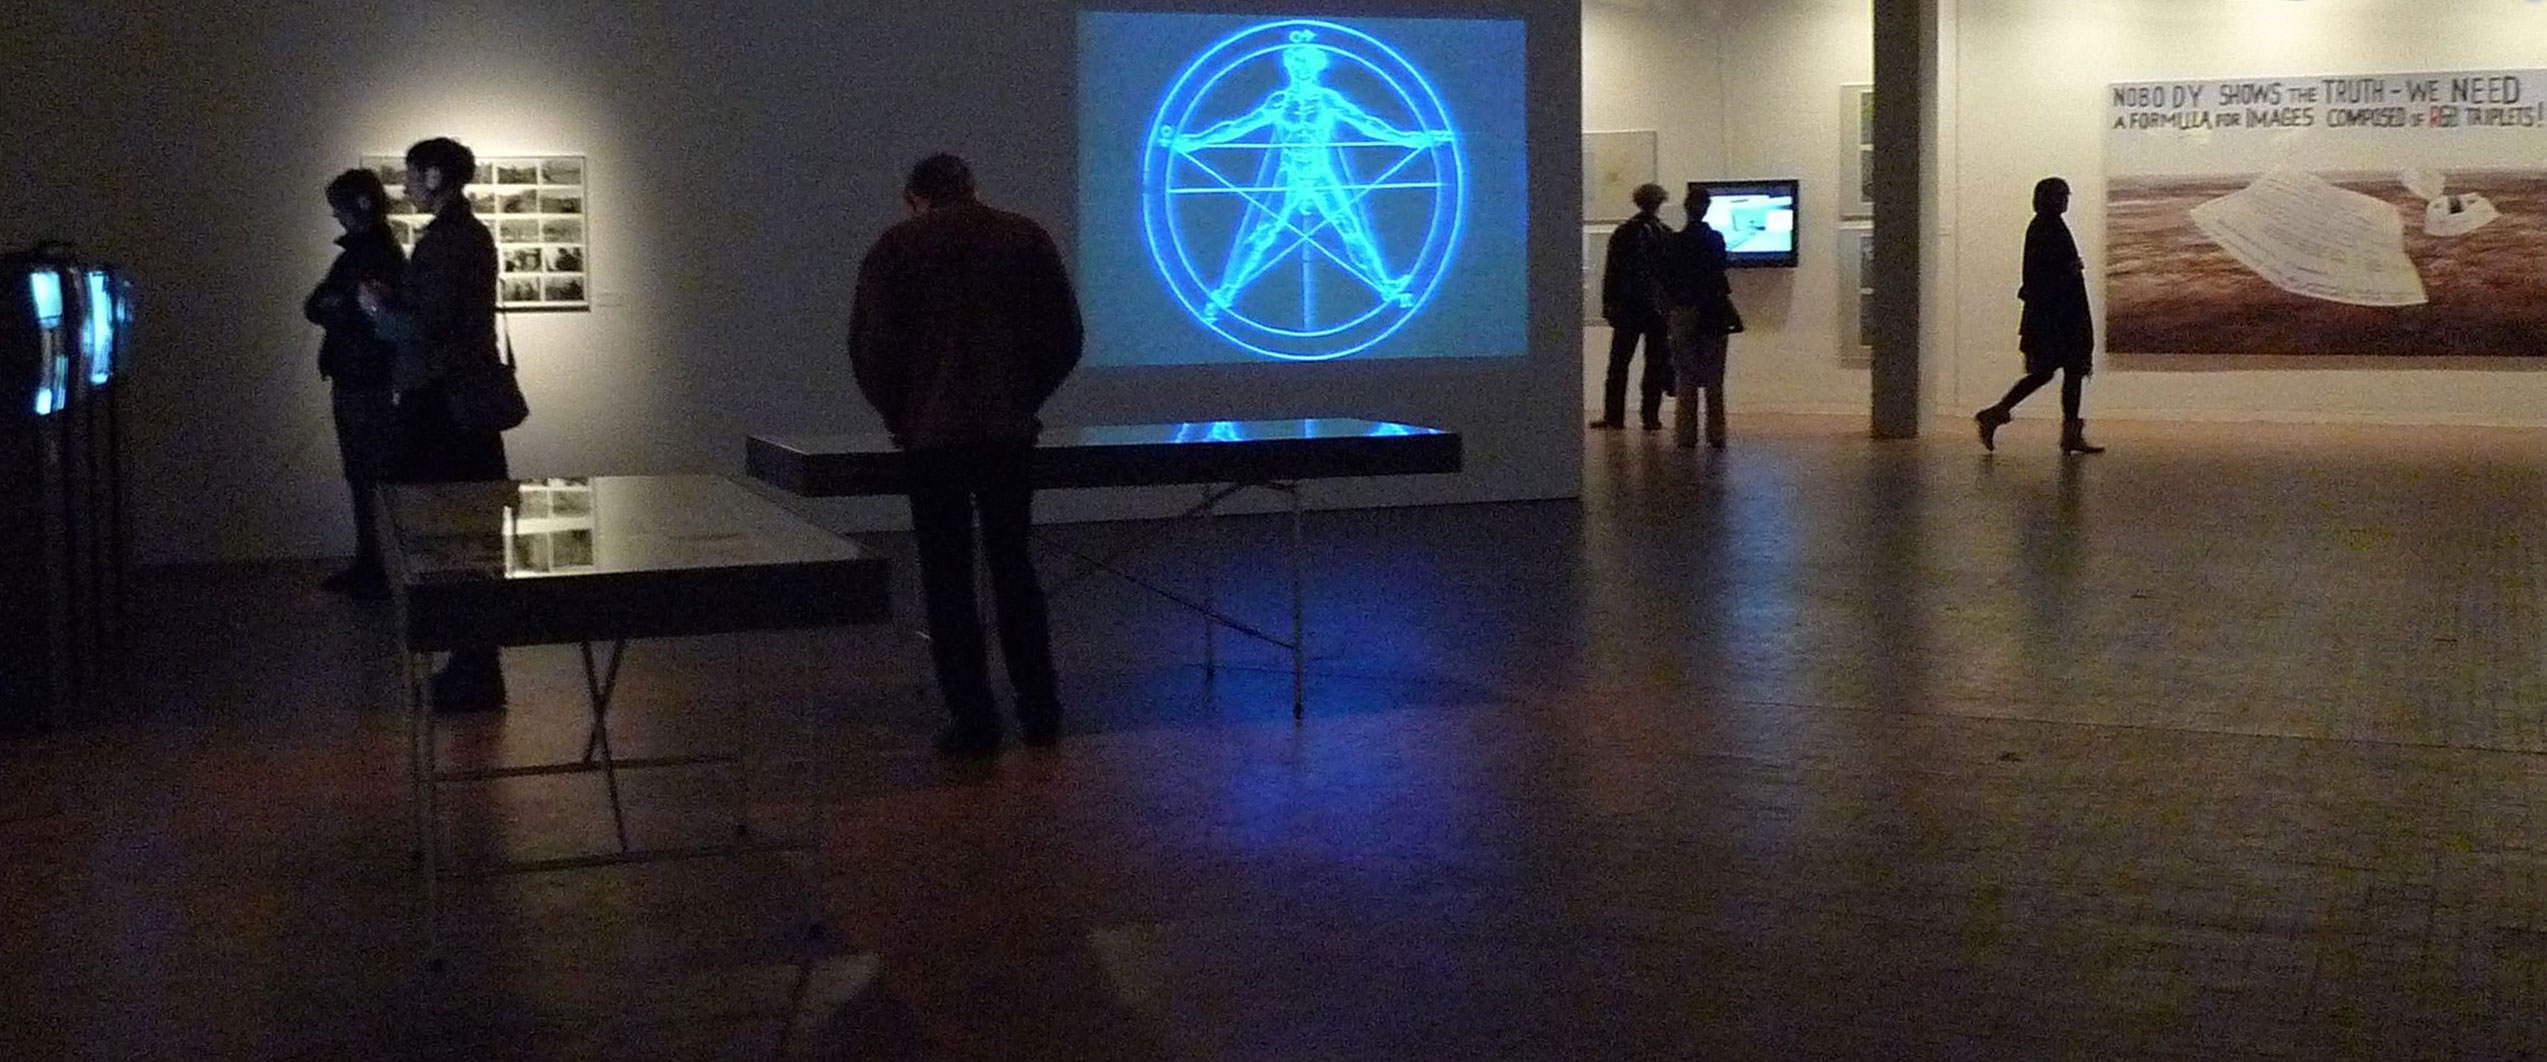 Installation view of the exhibition in Berlin